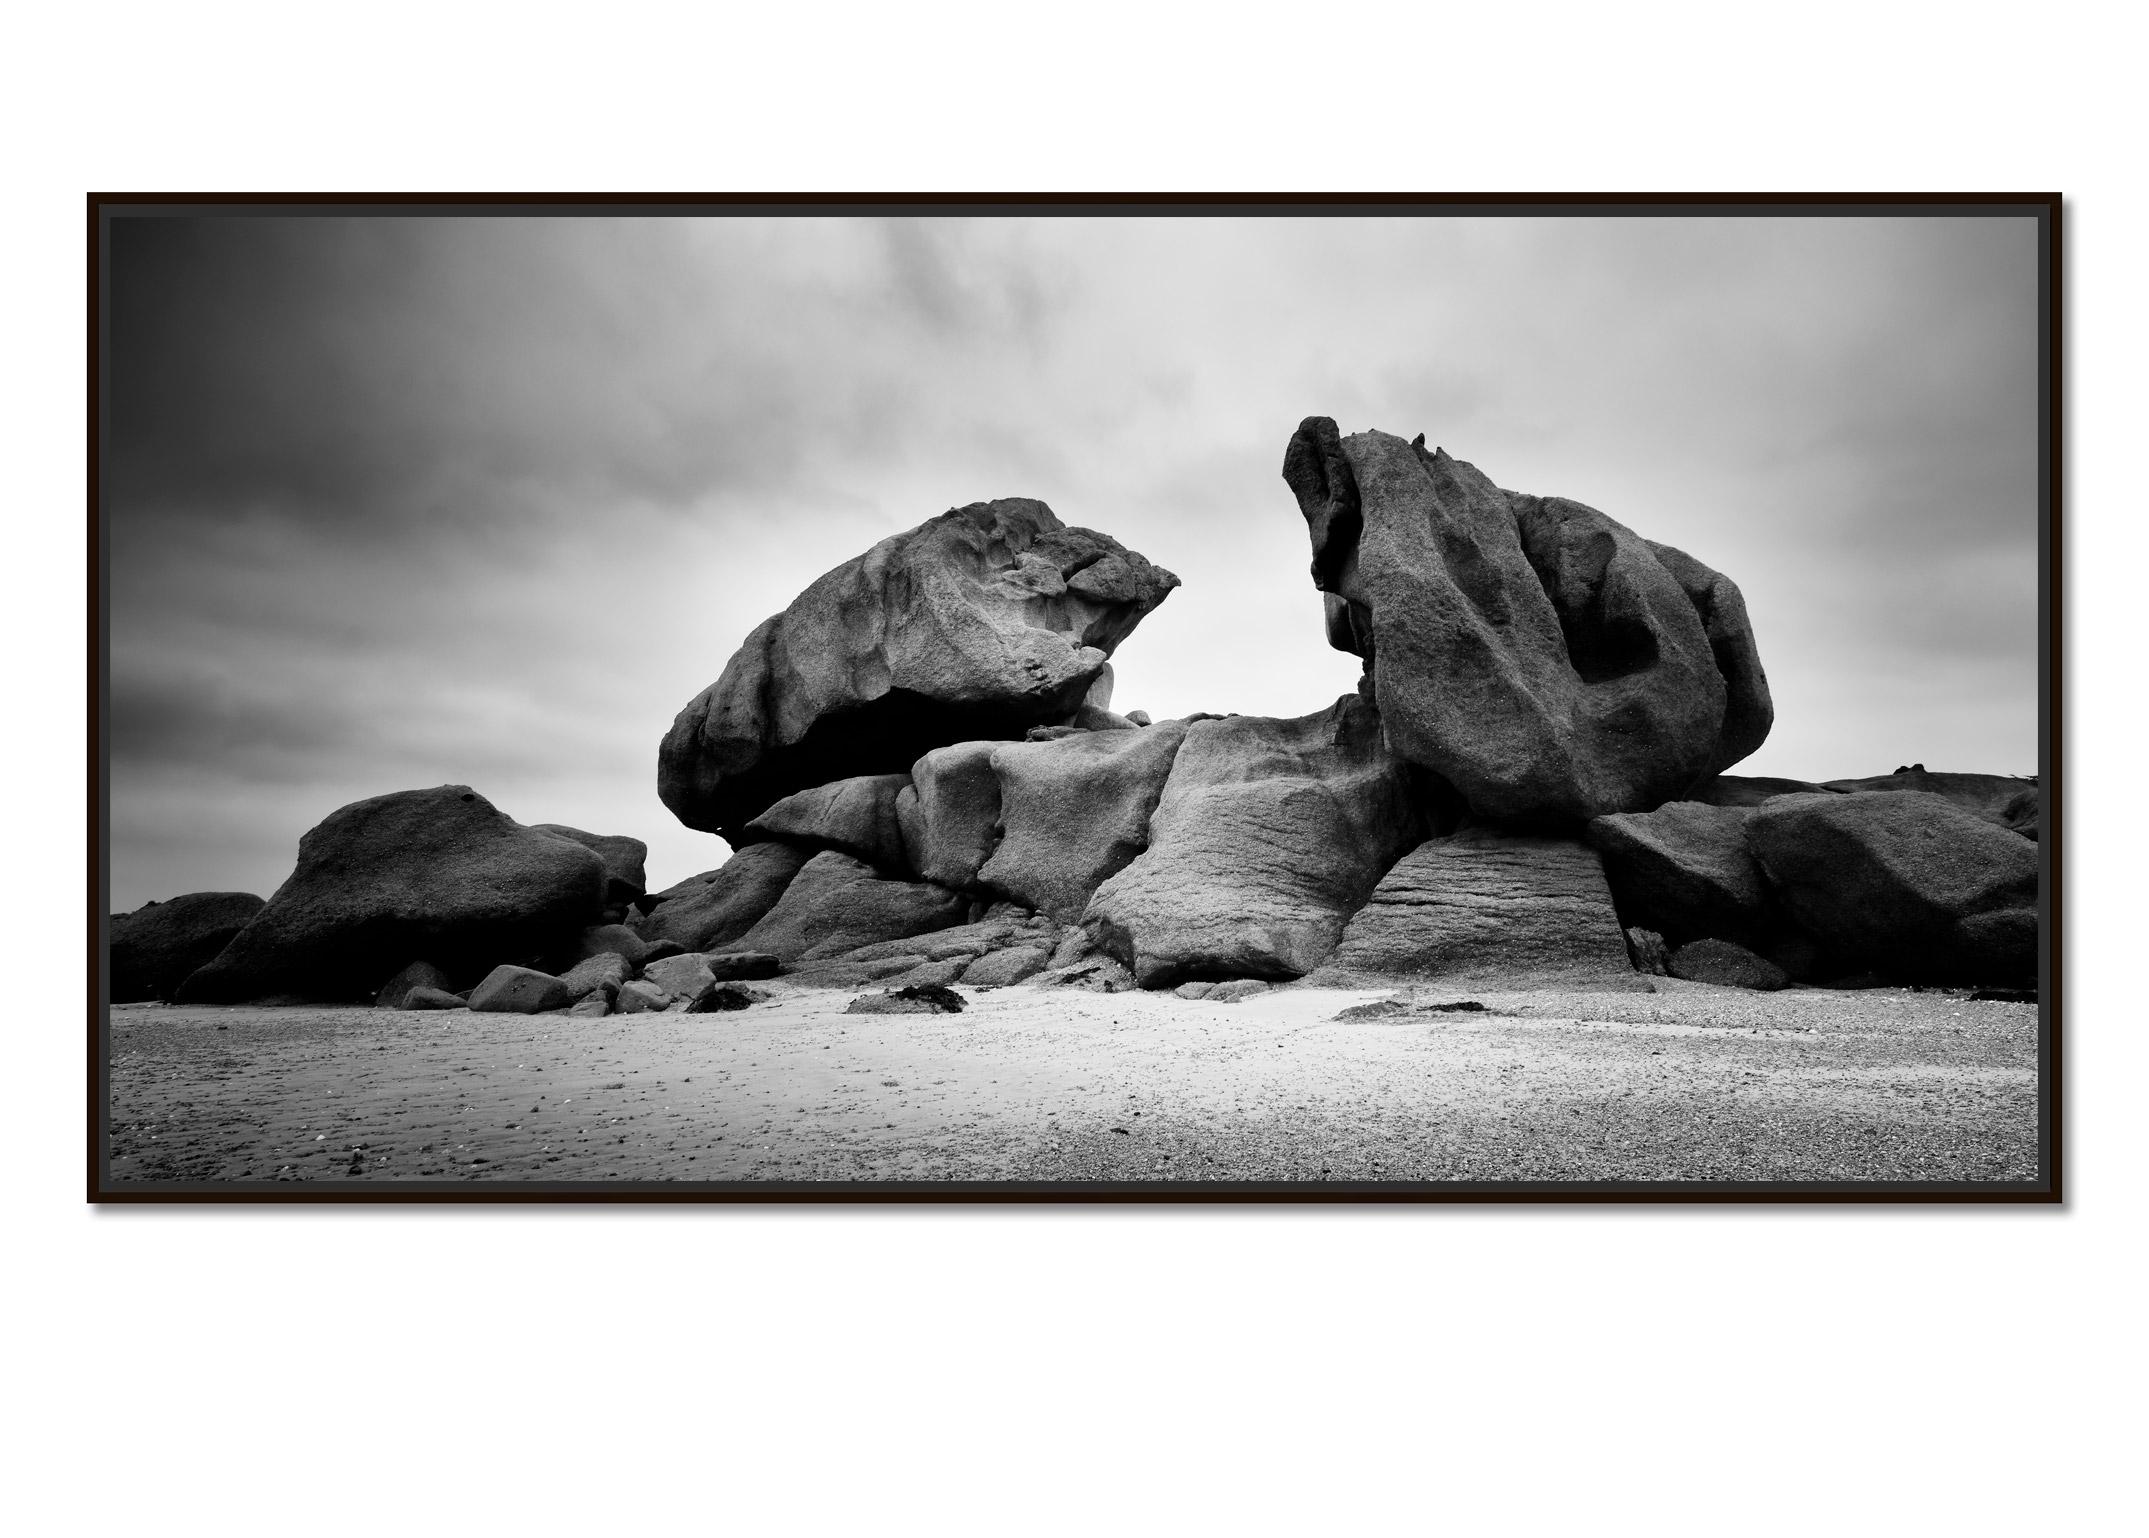 Crab Claws Rock, Panorama, Granite Coast, black and white landscape photography - Photograph by Gerald Berghammer